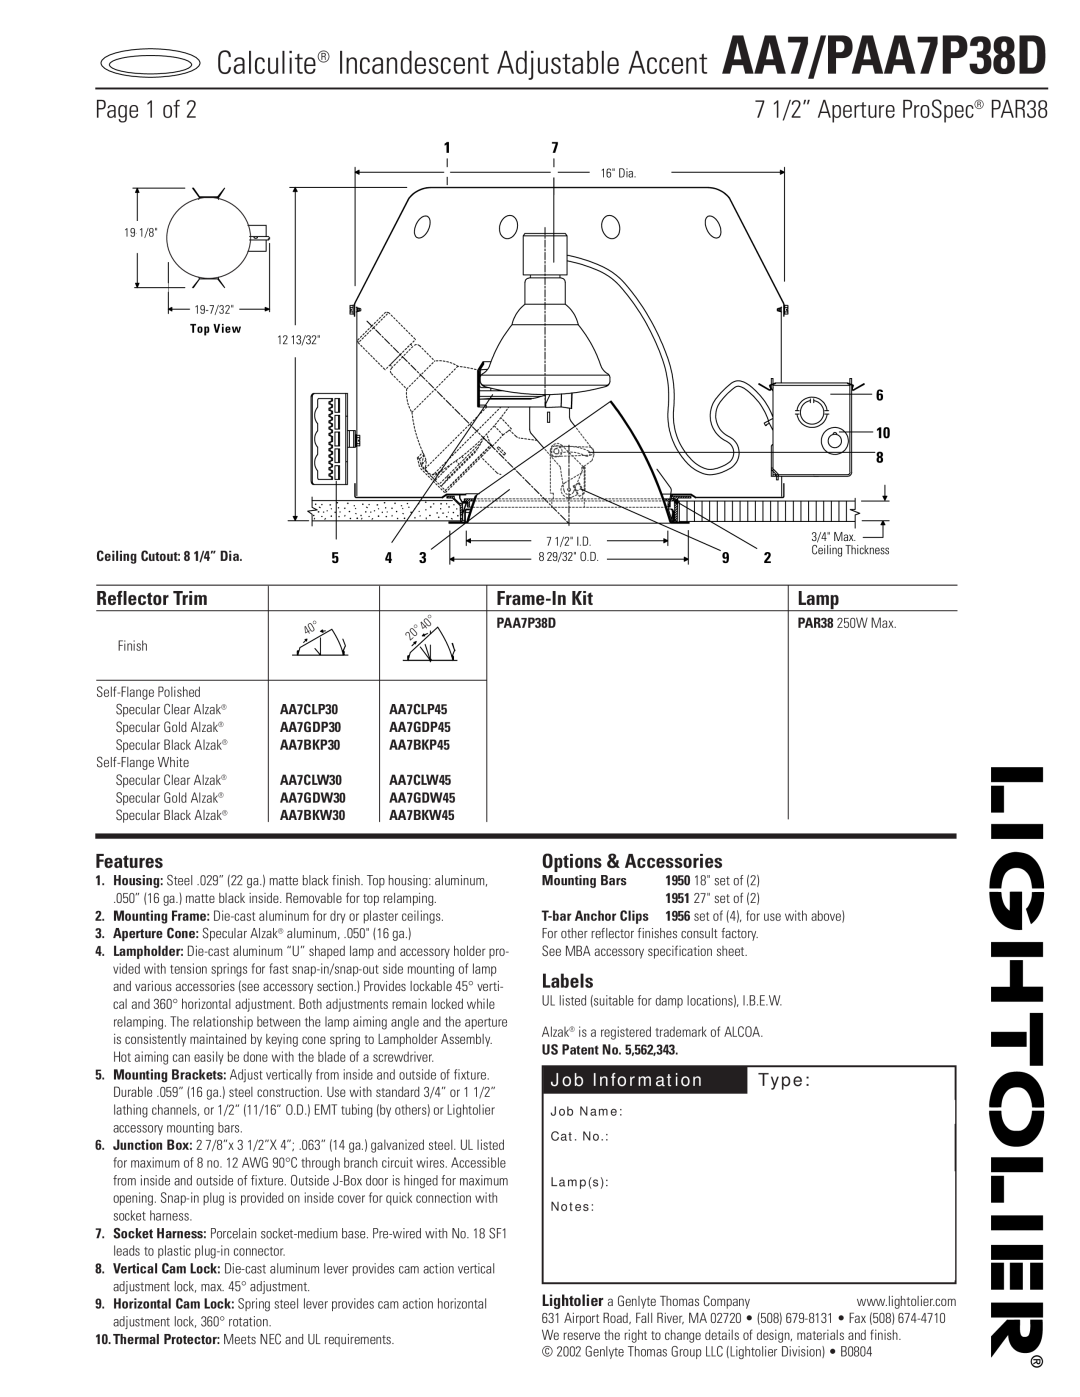 Lightolier AA7/PAA7P38D specifications Page 1 of, Reflector Trim, Frame-InKit, Lamp, Features, Options & Accessories, Type 